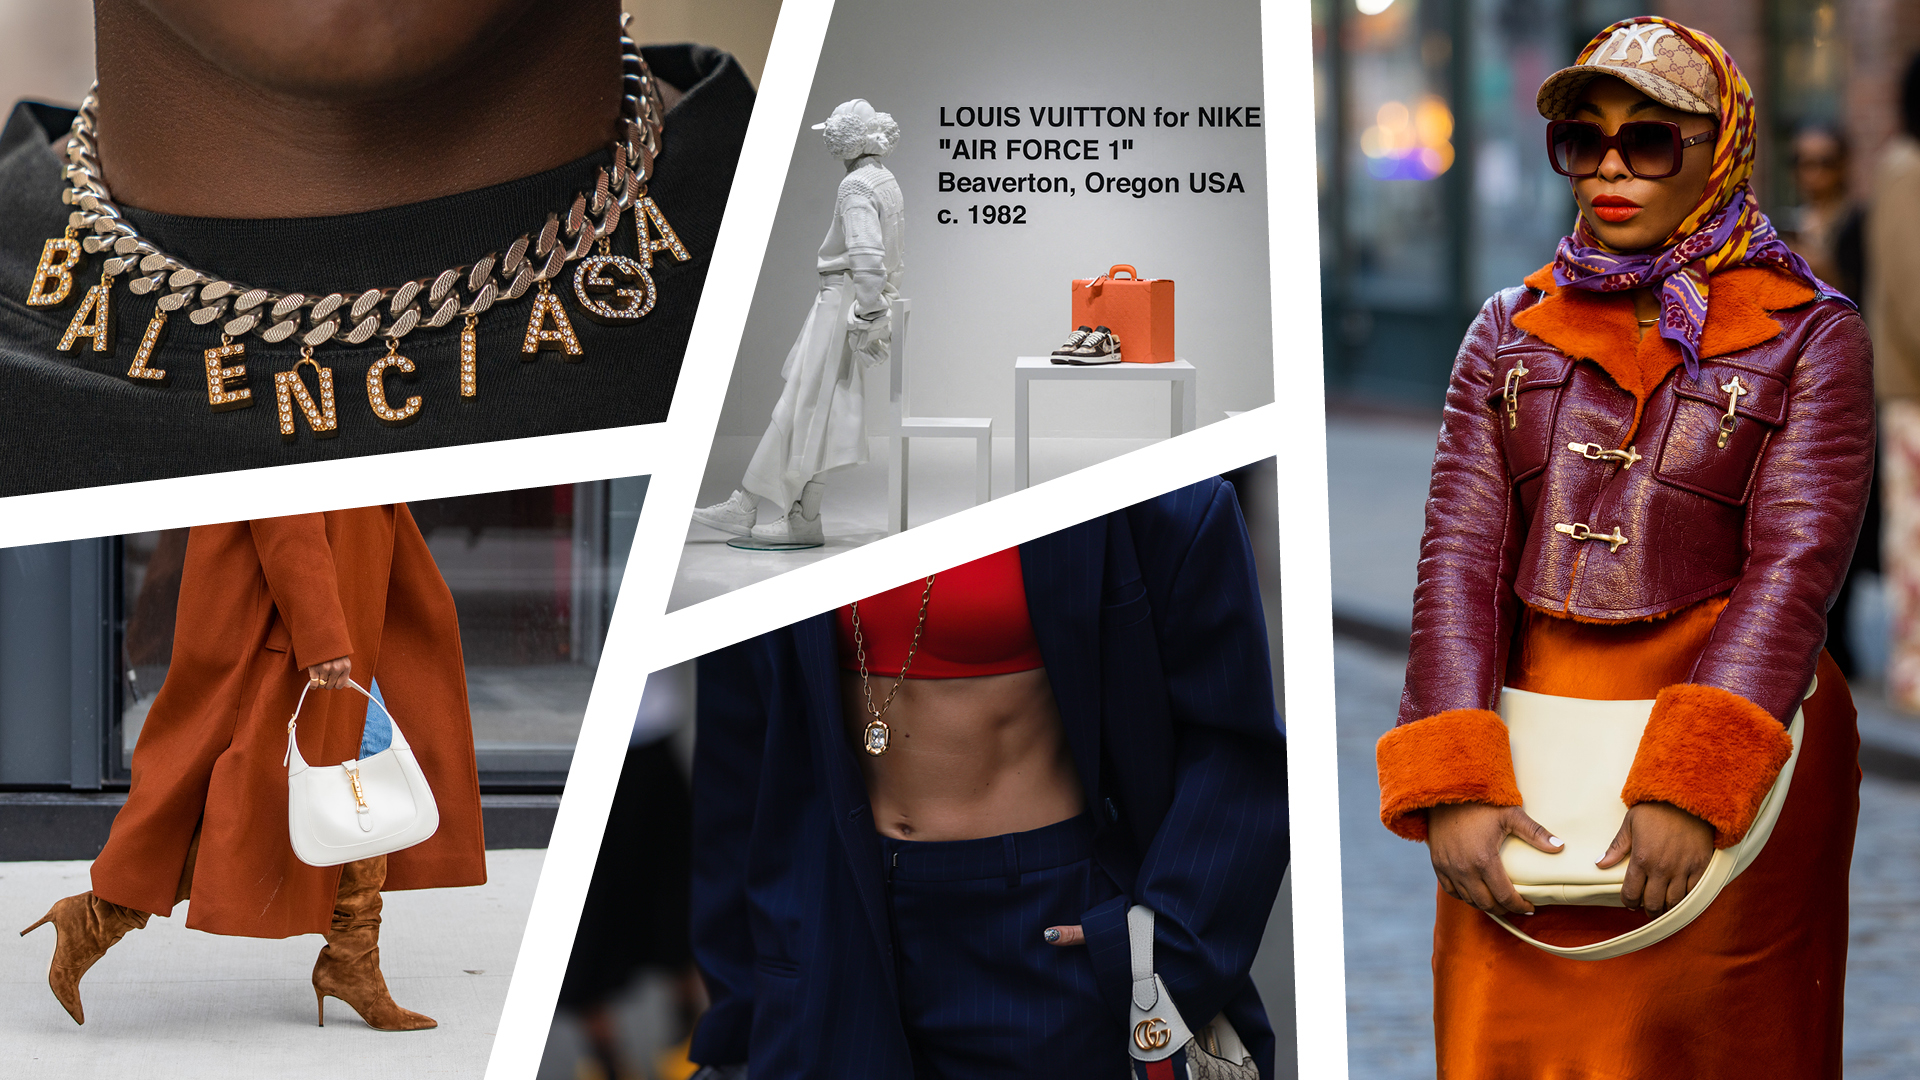 A photo illustration which includes a close-up of a necklace by Balenciaga x Gucci; someone walking in a long rust brown coat and knee high suede boots; a display at Sotheby’s which includes Louis Vuitton-Nike sneakers from Virgil Abloh’s last fashion show; the torso of someone wearing a gold long-chain necklace, red cropped top under a navy suit with a Gucci handbag; and a woman on a New York City street wearing a maroon leather jacket with bright orange detailing and a gucci cap.